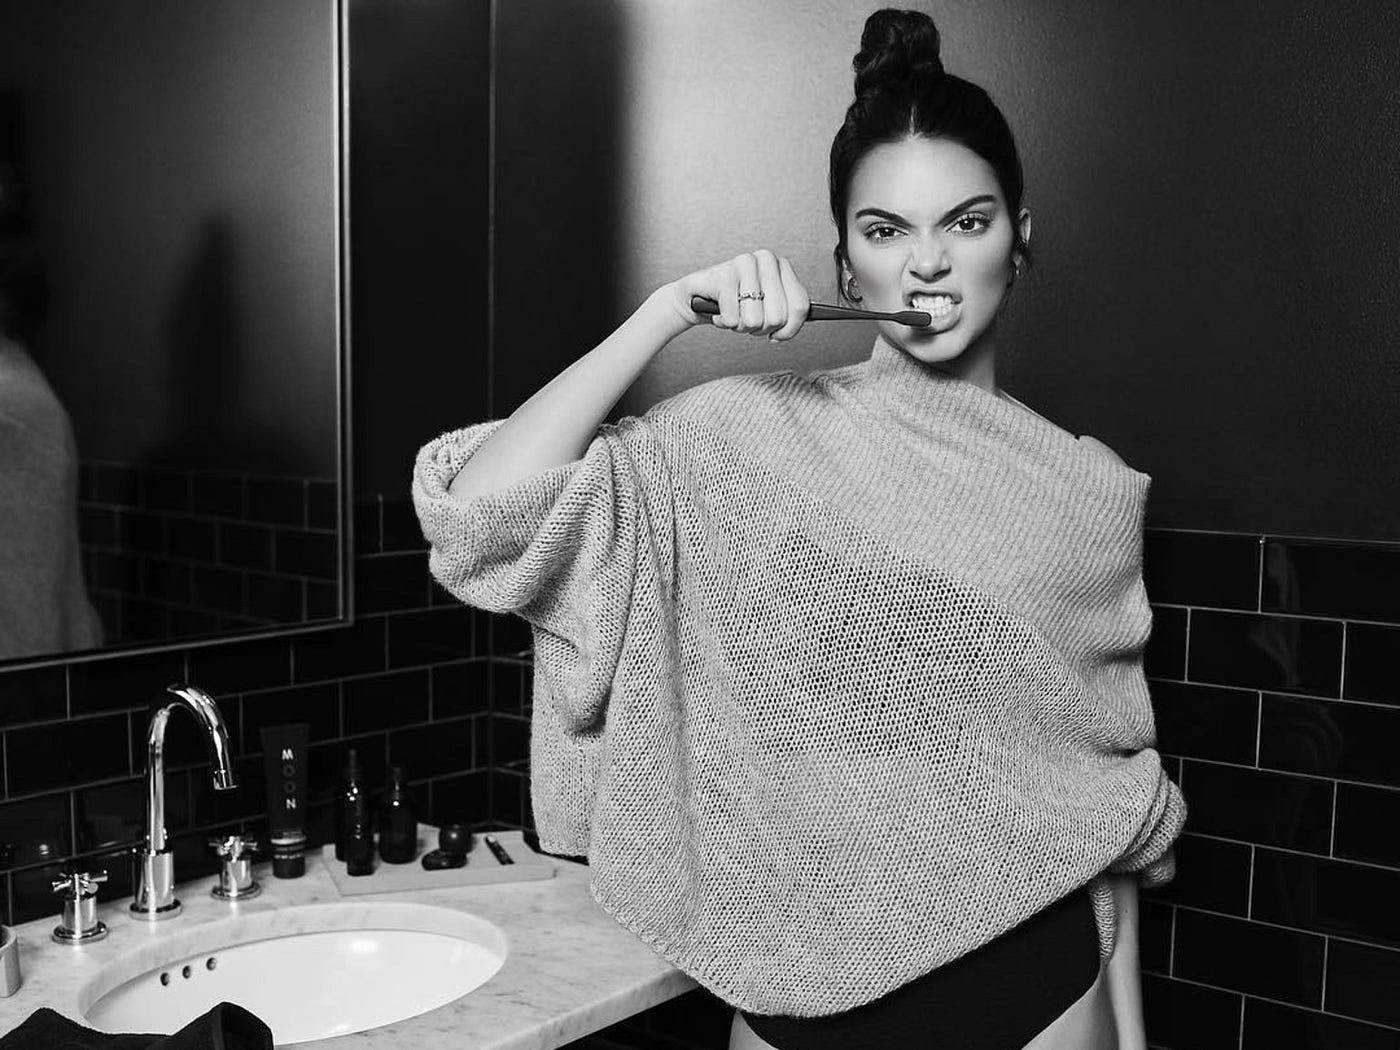 Oral Care Is The New Lifestyle Beauty Category— Here's What You Should Do, by Susanna Ly